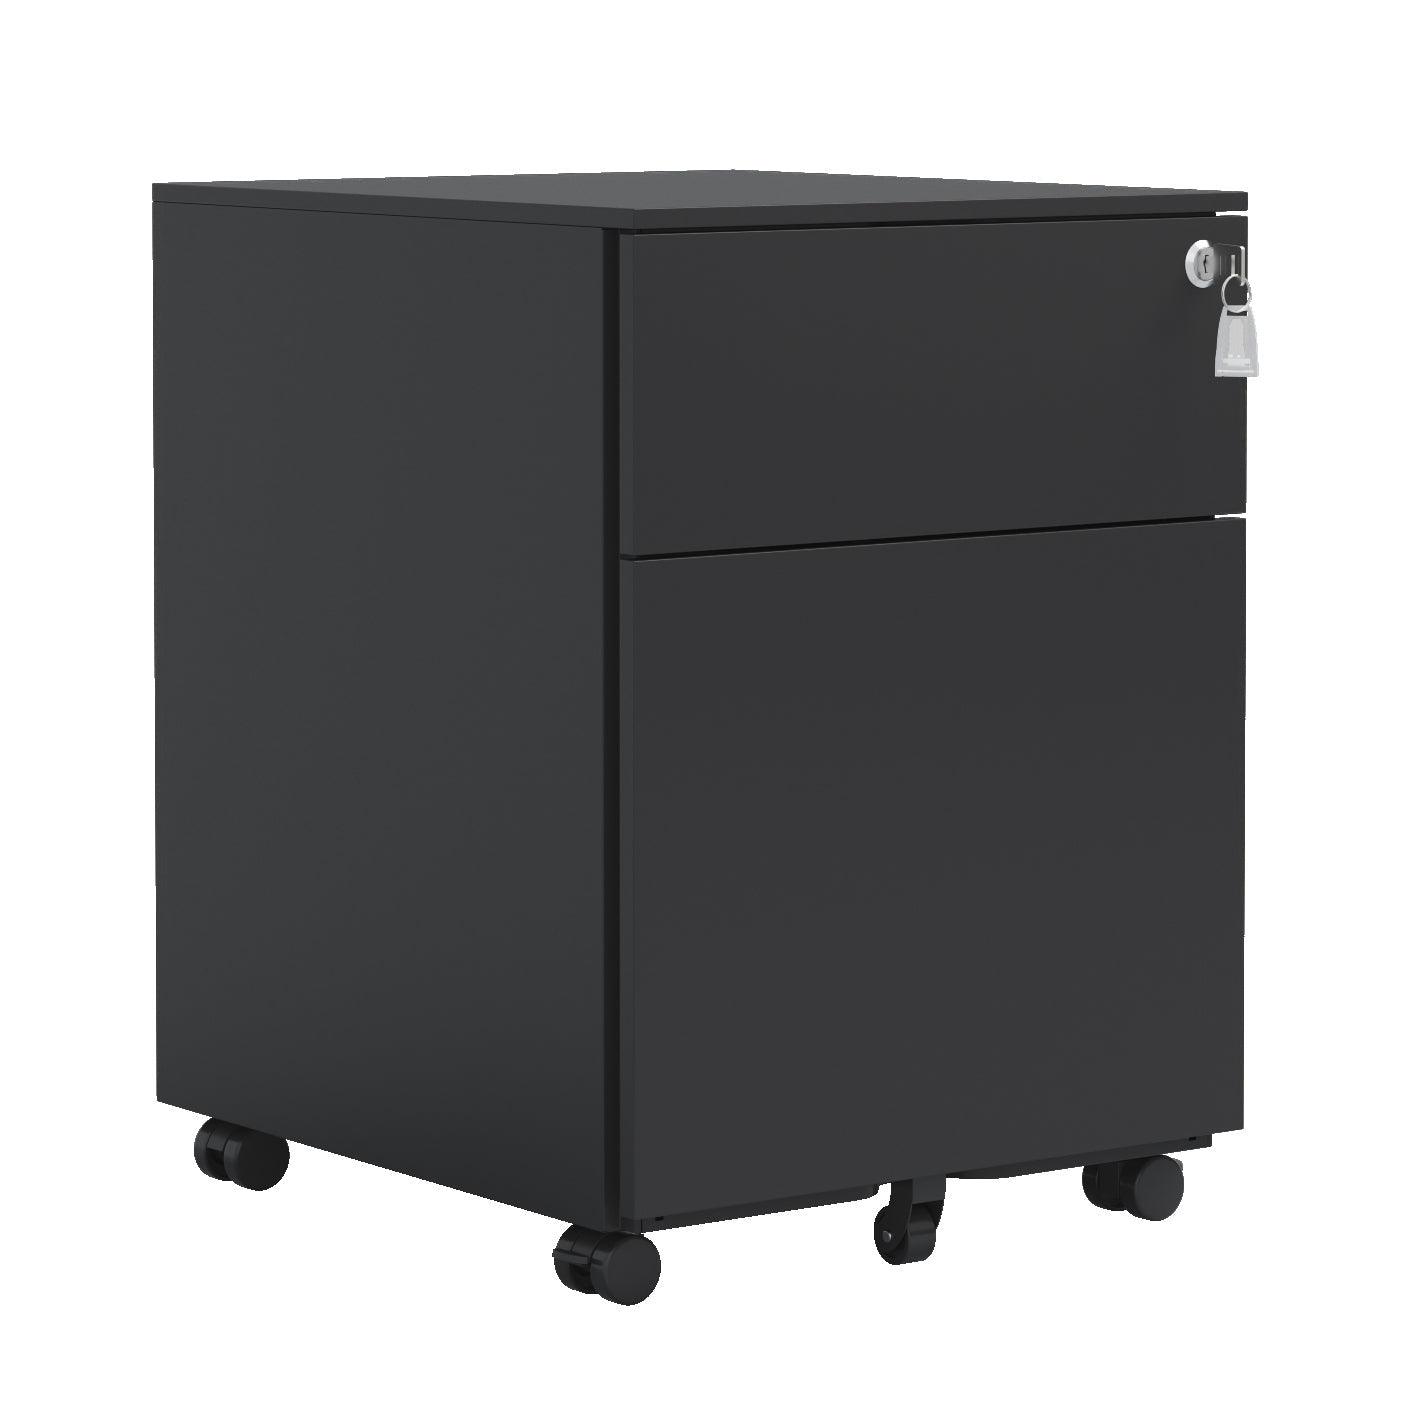 2 Drawer Mobile File Cabinet with Lock Steel File Cabinet for Legal/Letter/A4/F4 Size, Fully Assembled Include Wheels, Home/ Office Design, Black LamCham